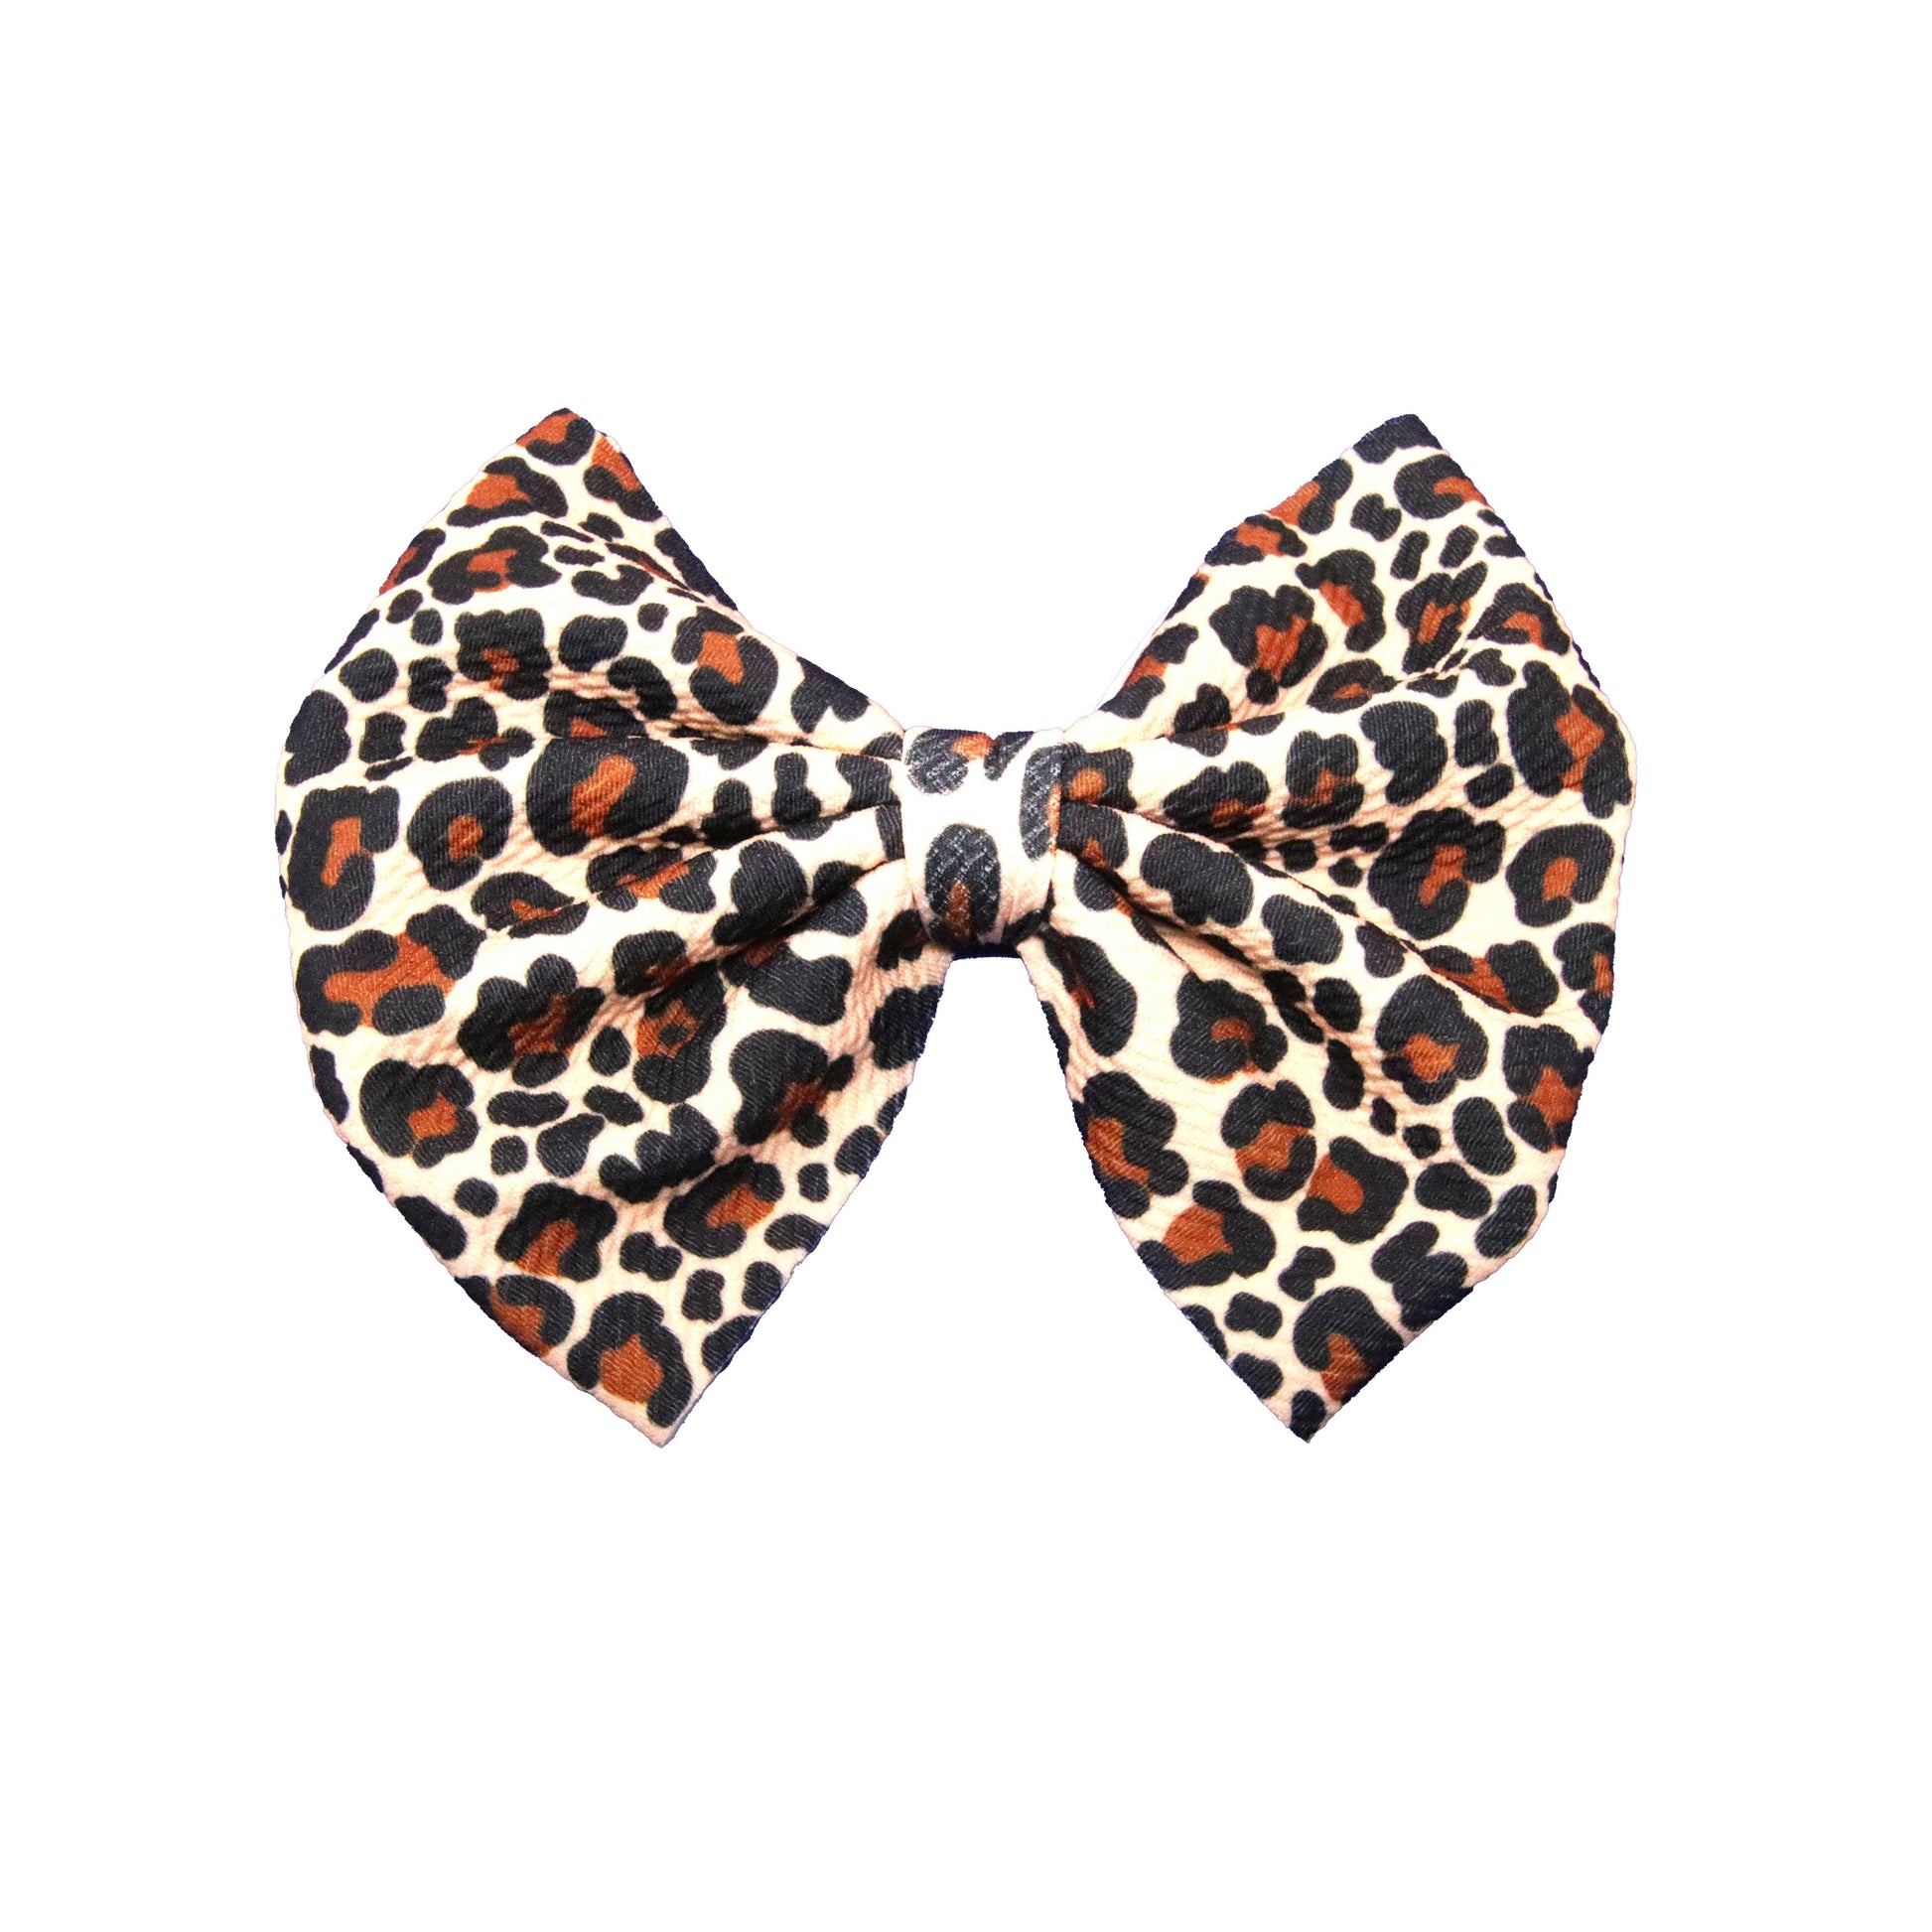 7", Bow, Hair Bow, Leopard Print, Fabric Bow, New Product - 04OCT2020